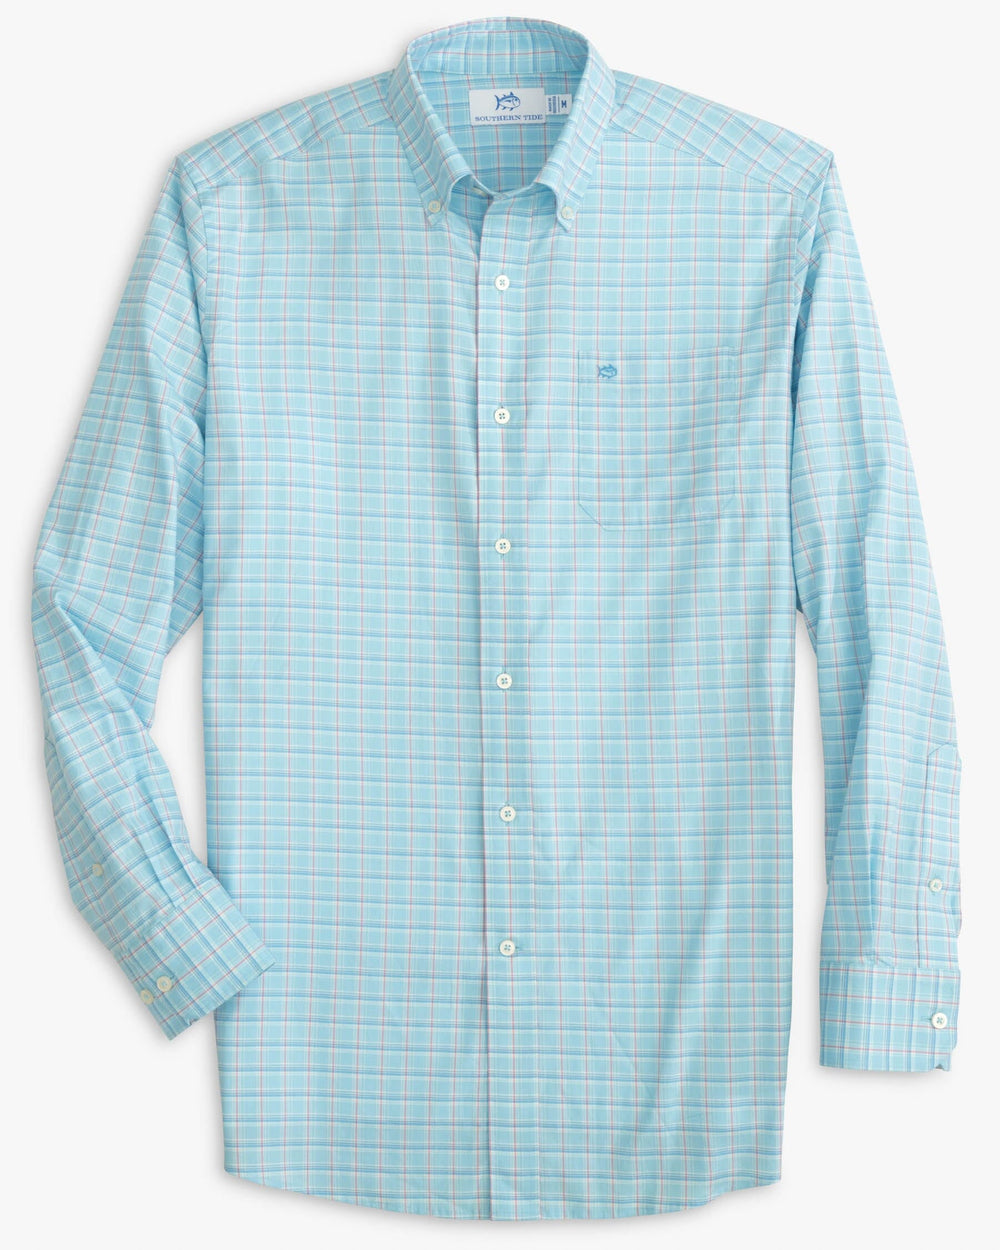 The front view of the Skipjack Winton Plaid Sport Shirt by Southern Tide - Rain Water